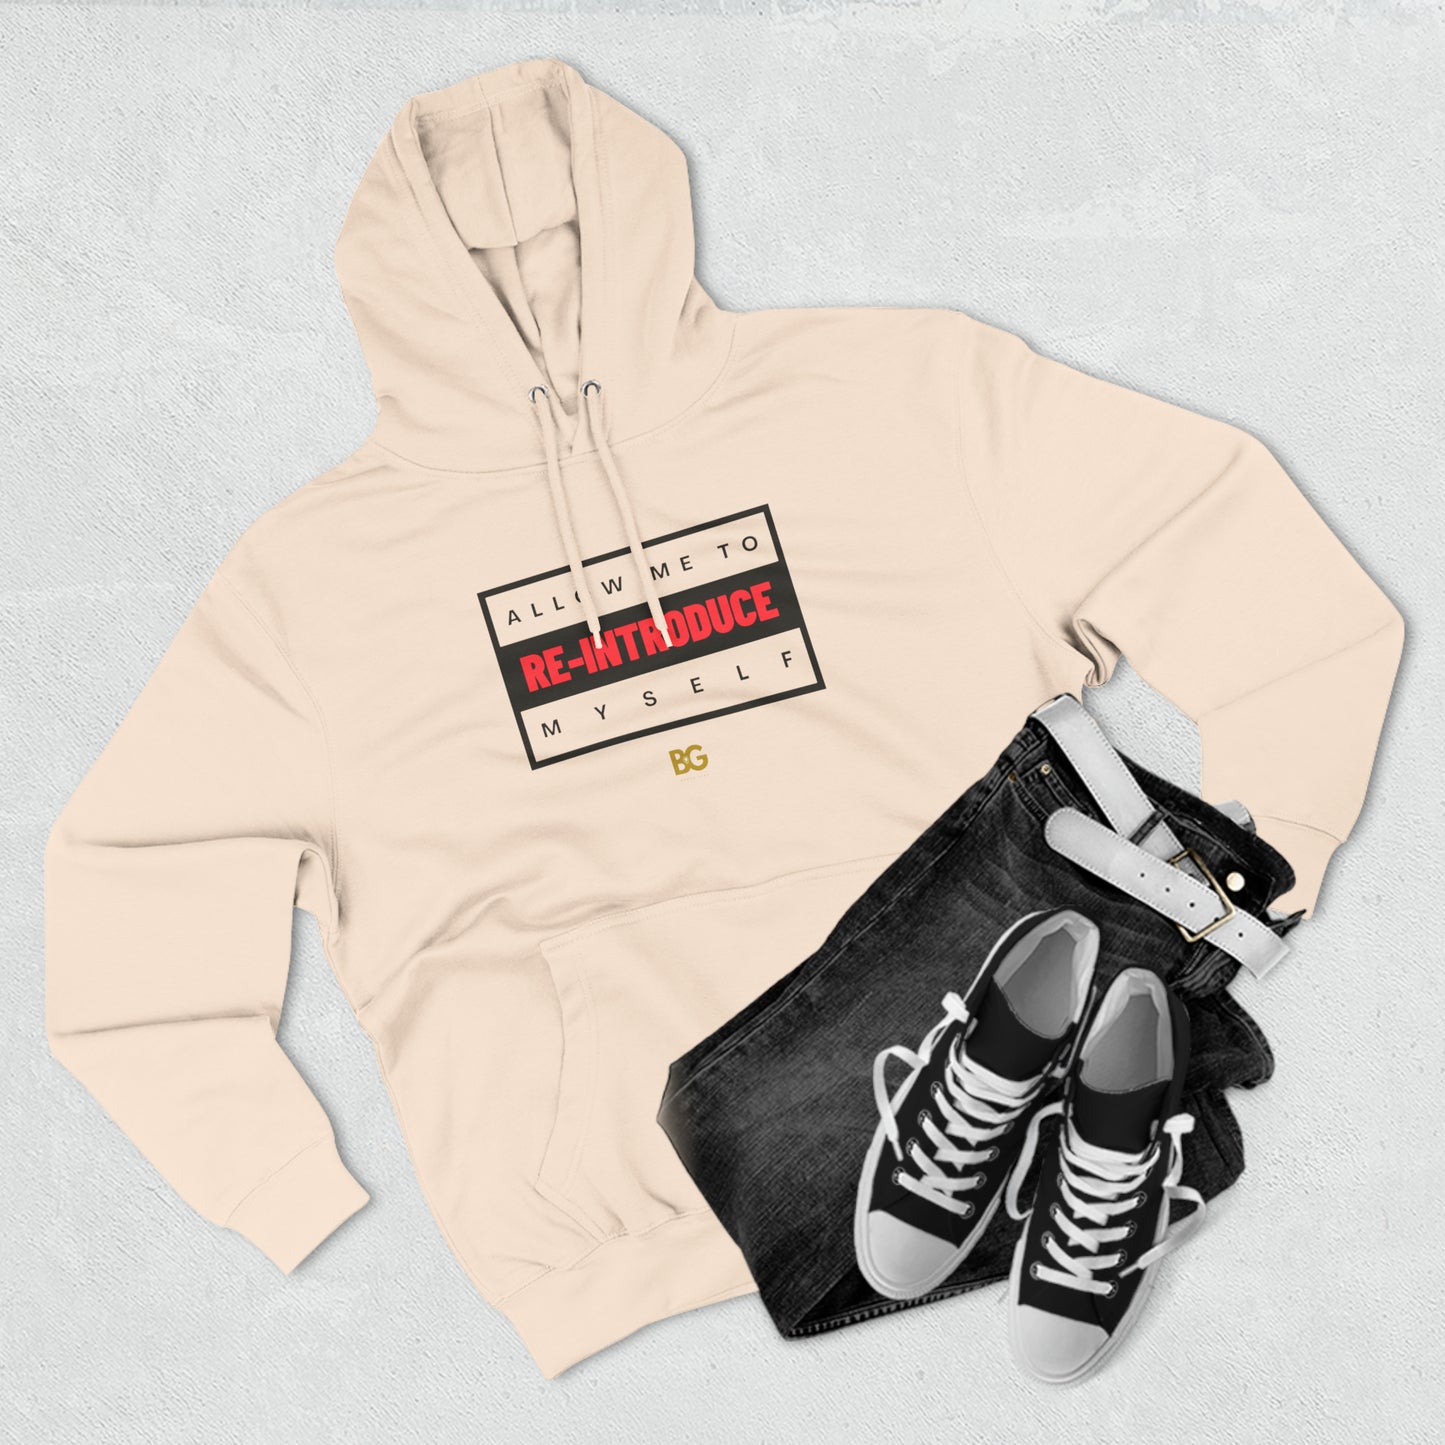 BG "Allow me to re-introduce myself" Premium Pullover Hoodie